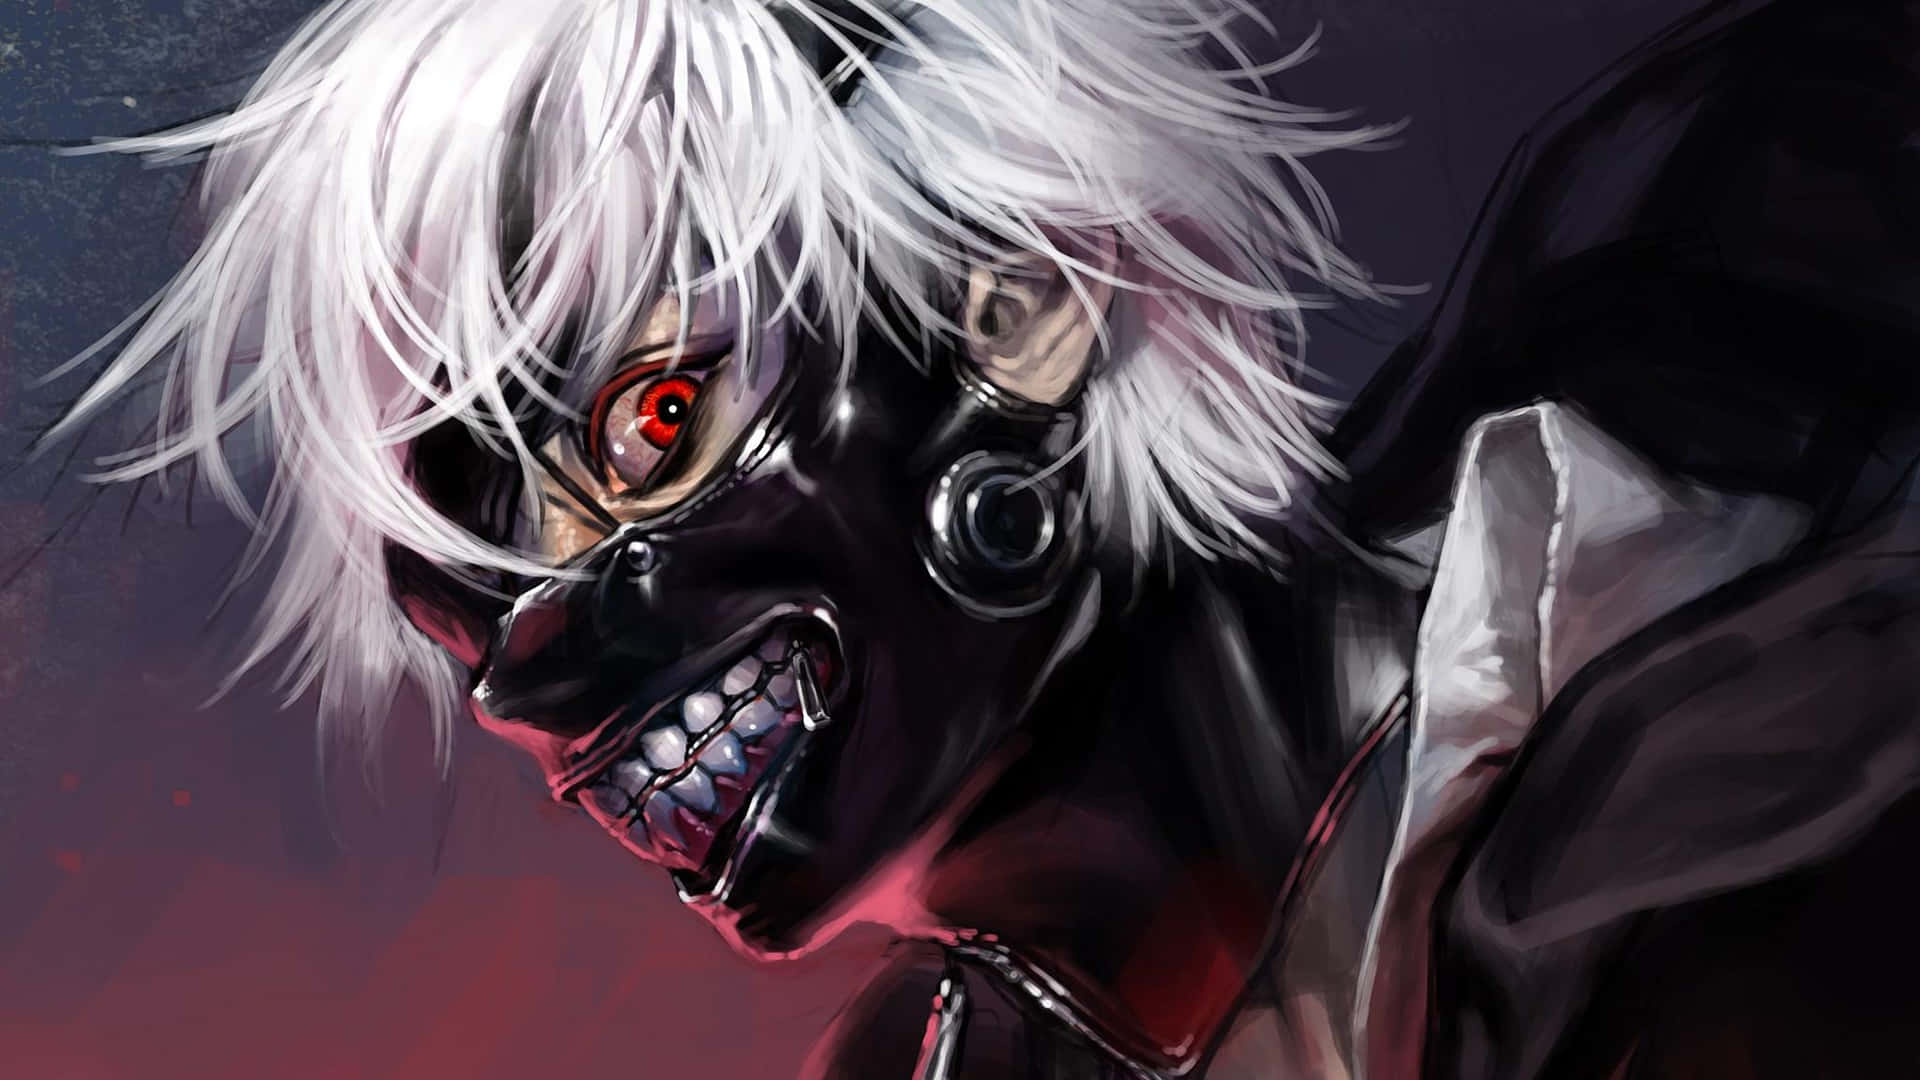 Explore The World Of Tokyo Ghoul On Your Desktop Wallpaper